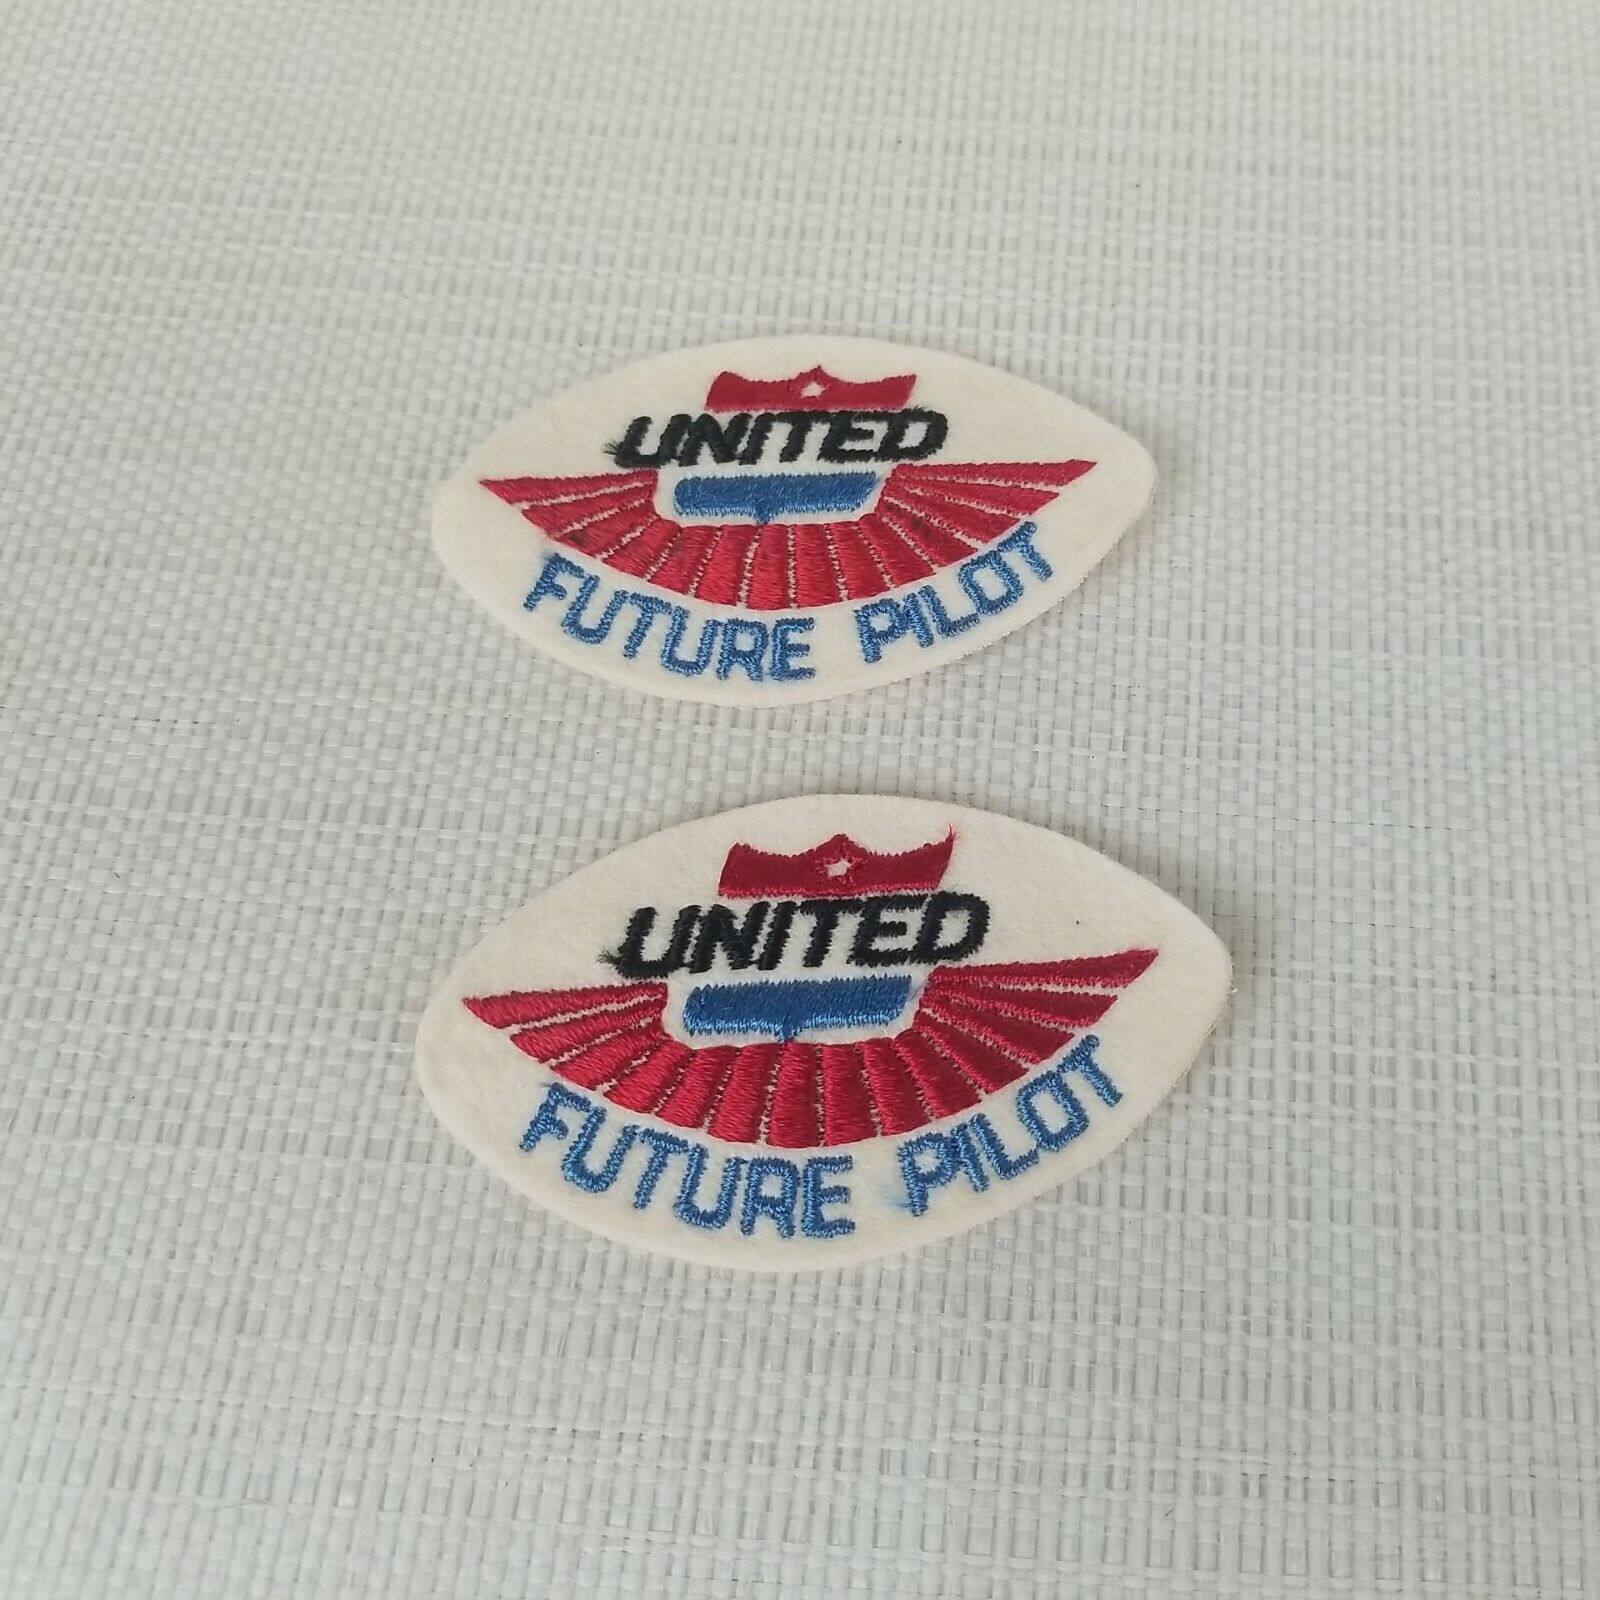  UNITED AIRLINES Airplane Logo Aviation Patch